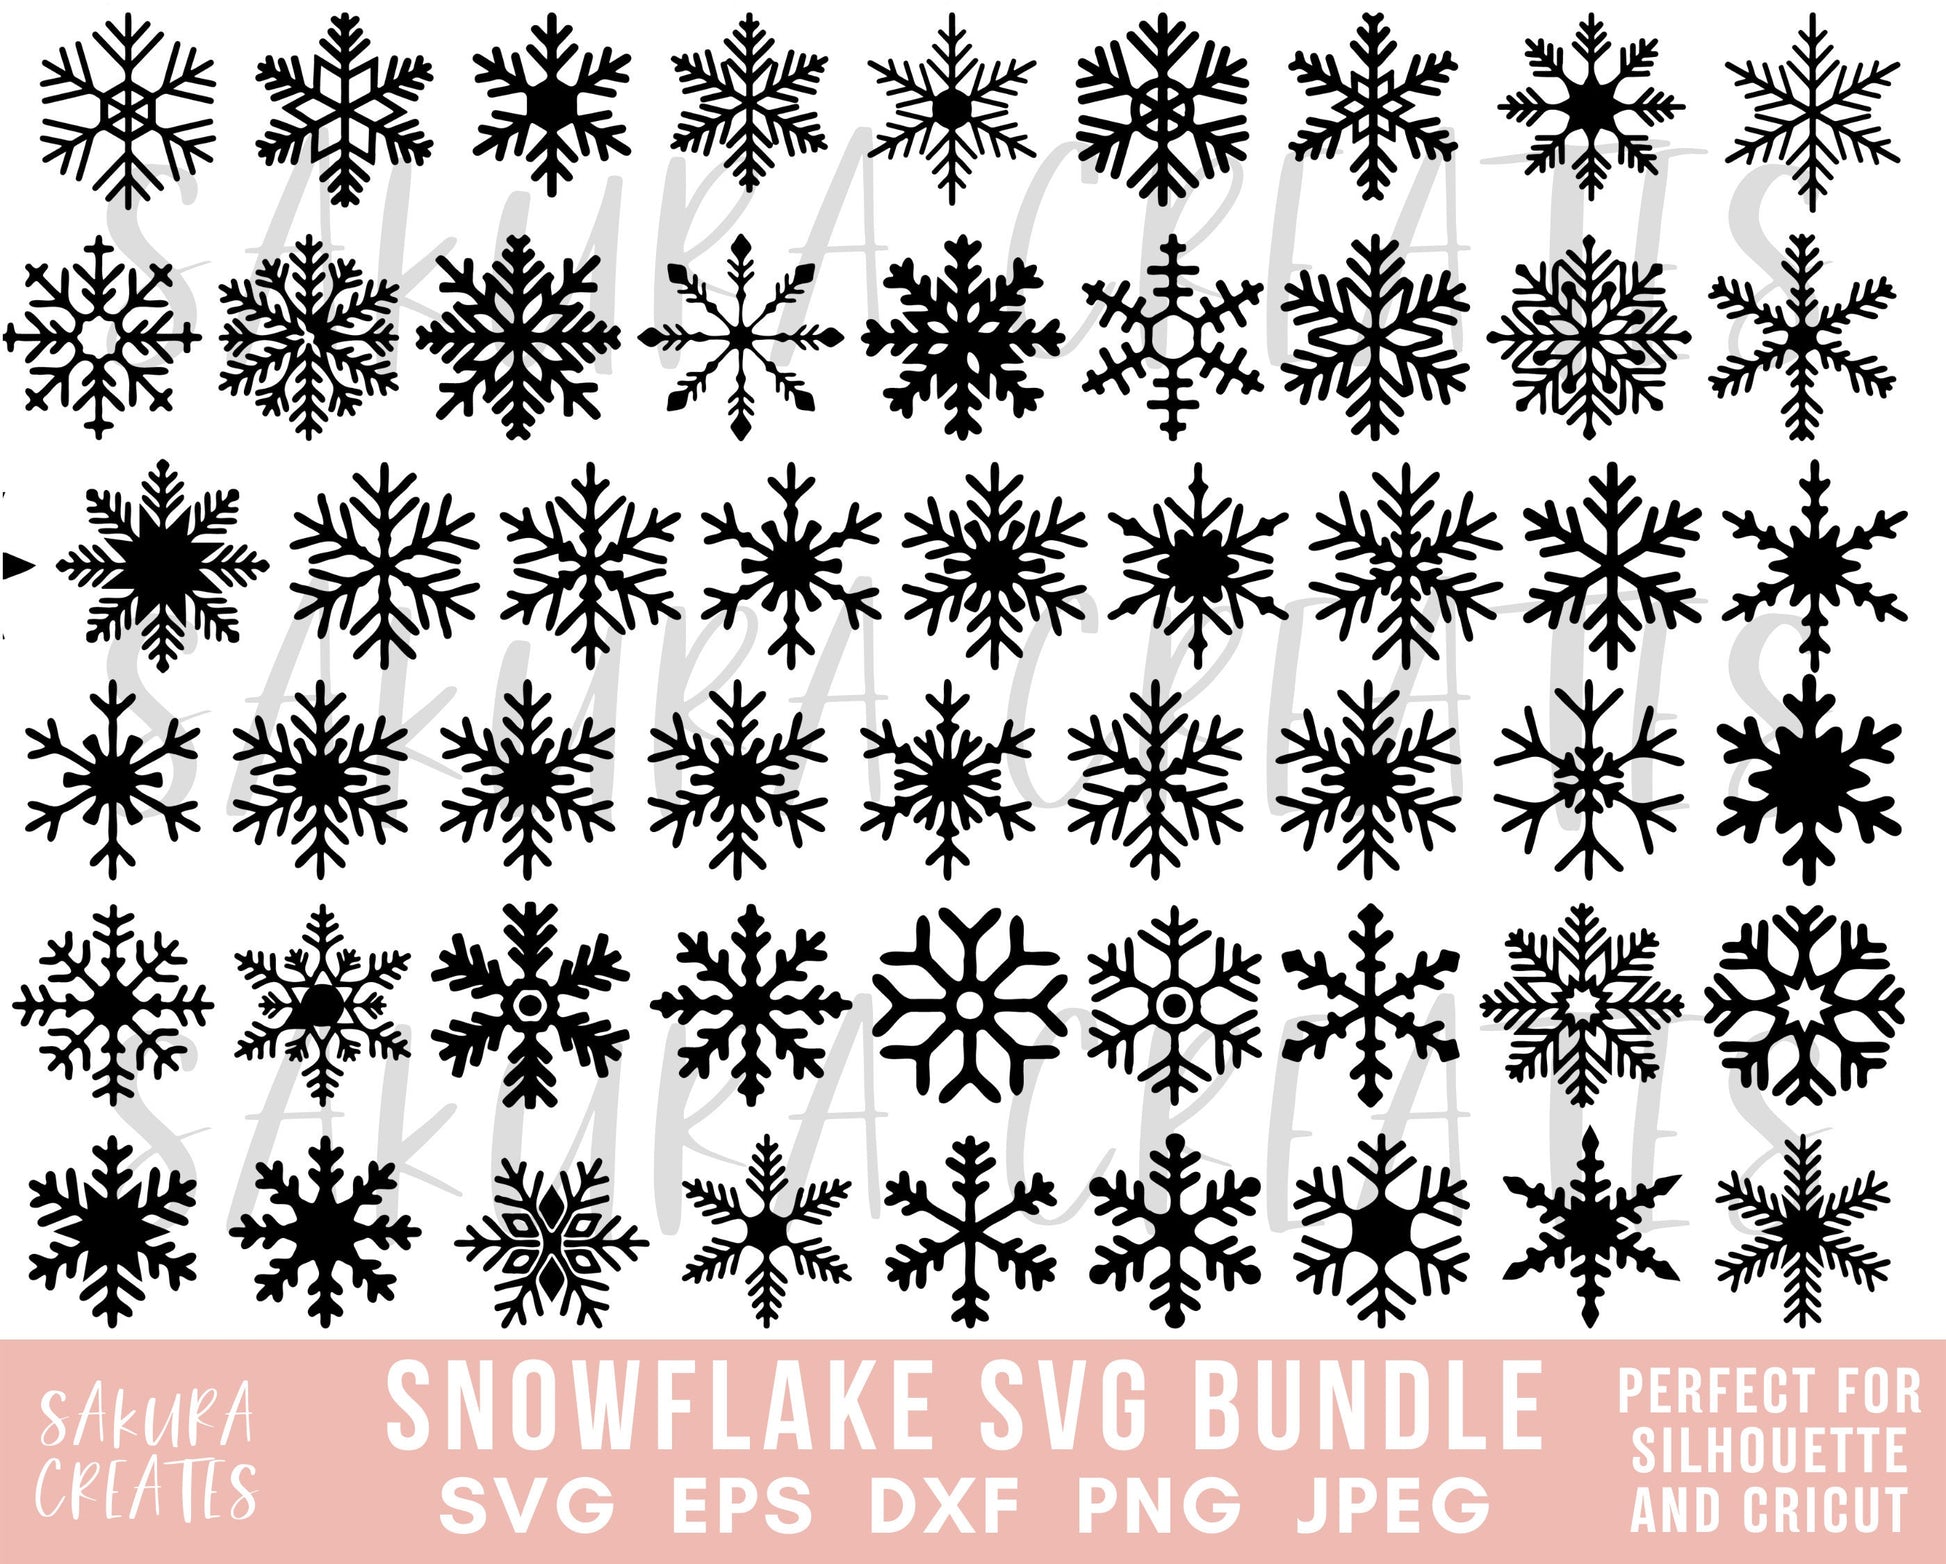 Black And White Snowflakes SVG Clipart, Snowflakes Image Digital Download,  Snowflakes Eps Png Dxf Printable, Snowflakes Vector Files